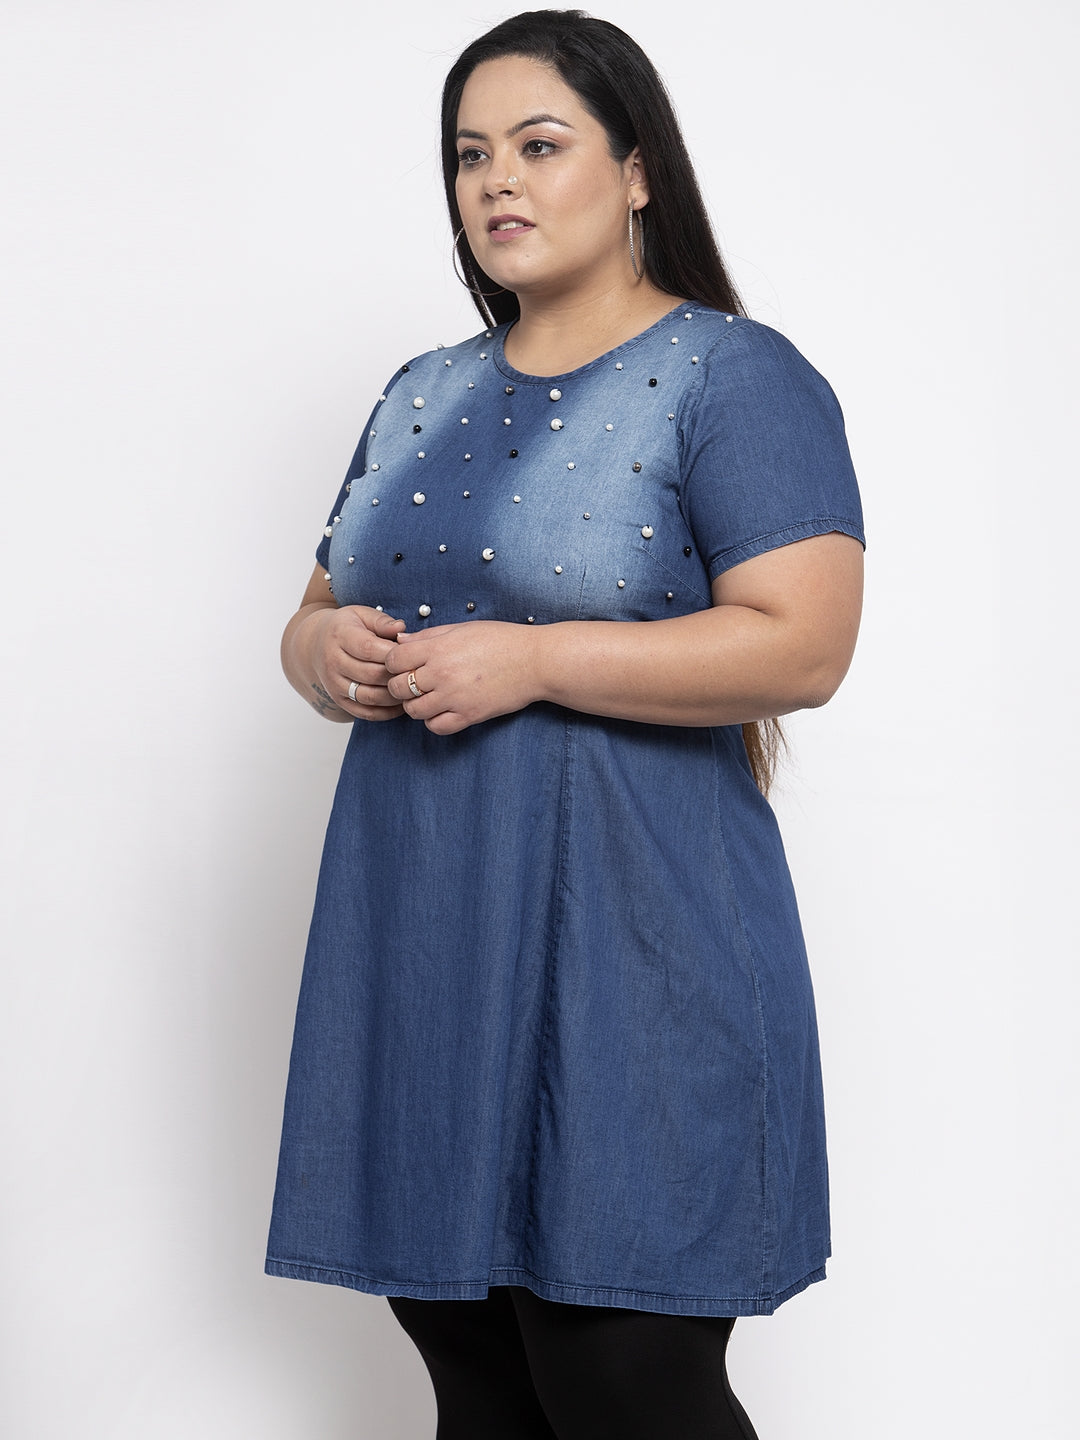 Women Blue Embellished Fit and Flare Dress